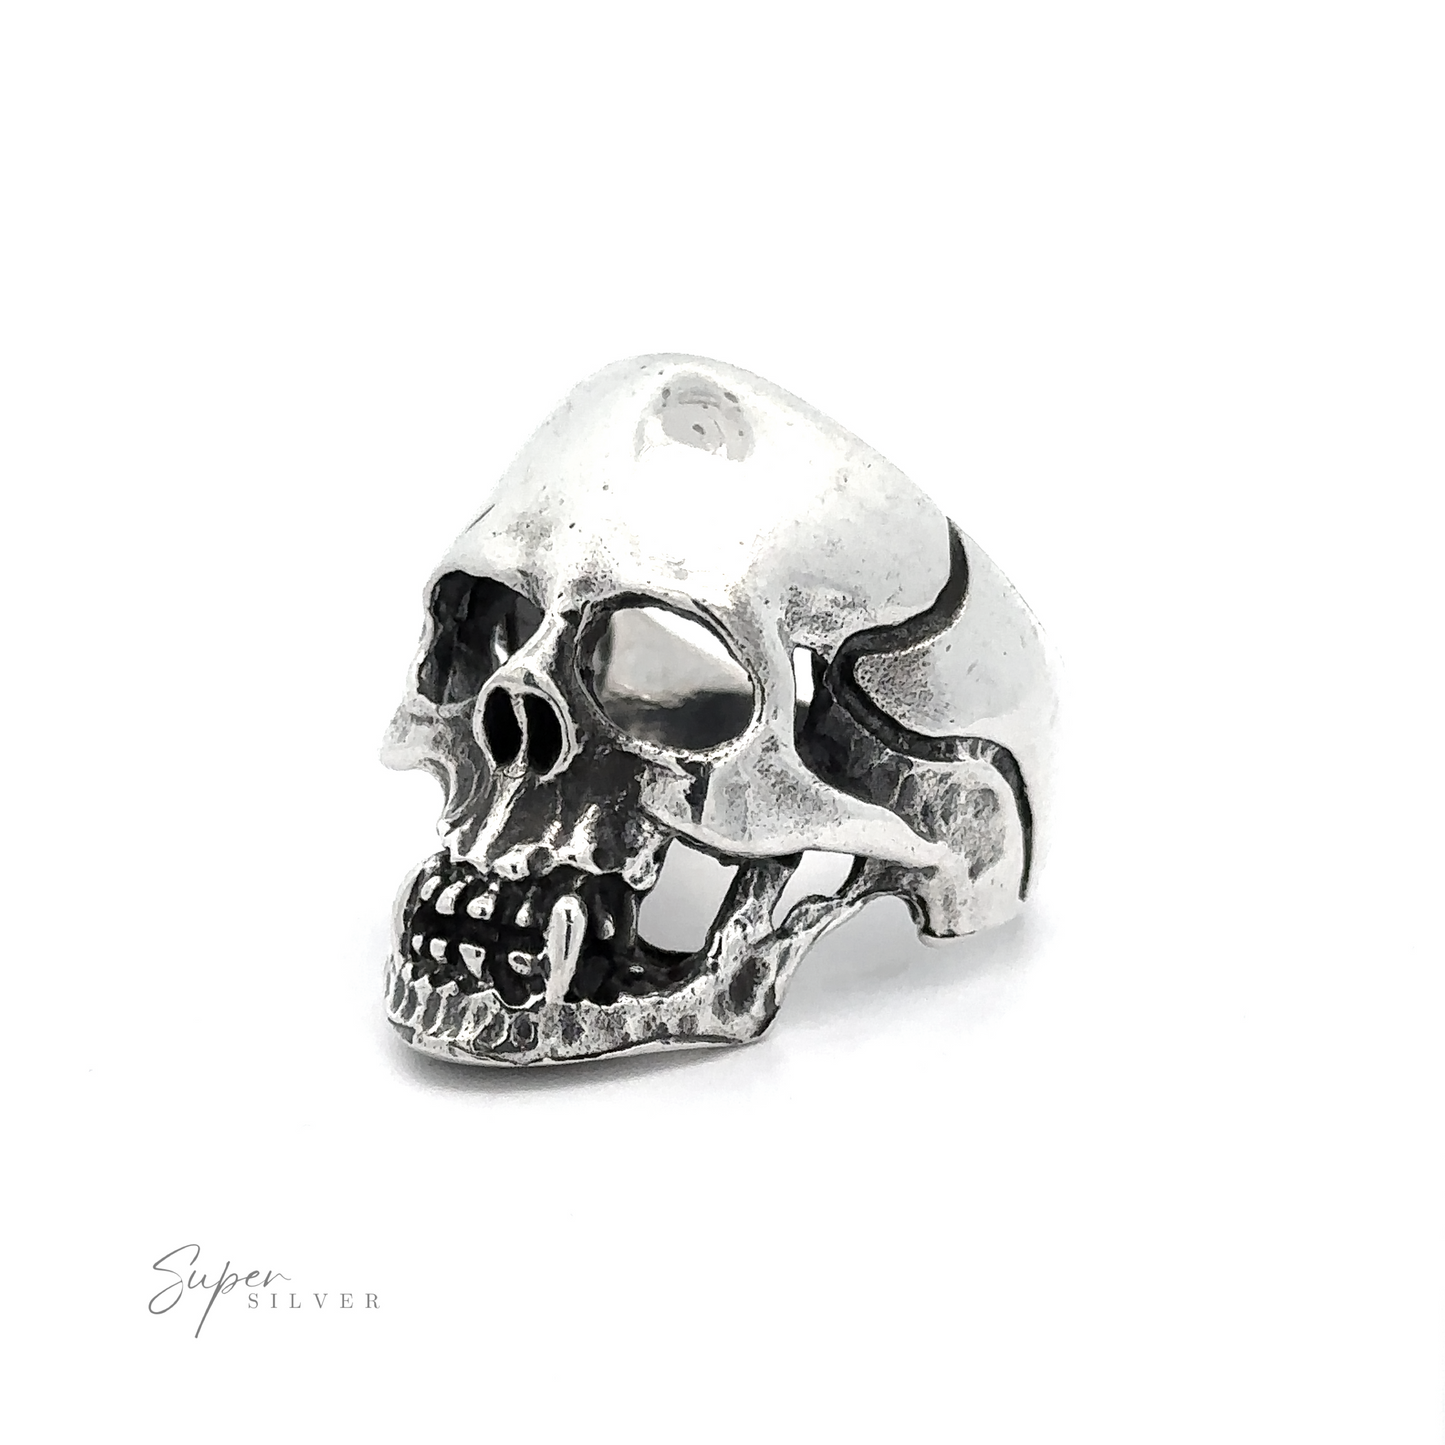 A Large Fanged Skull Statement Ring with a partially open mouth is displayed against a white background. The words "Super Silver" appear in the bottom left corner, adding to its gothic aesthetic.